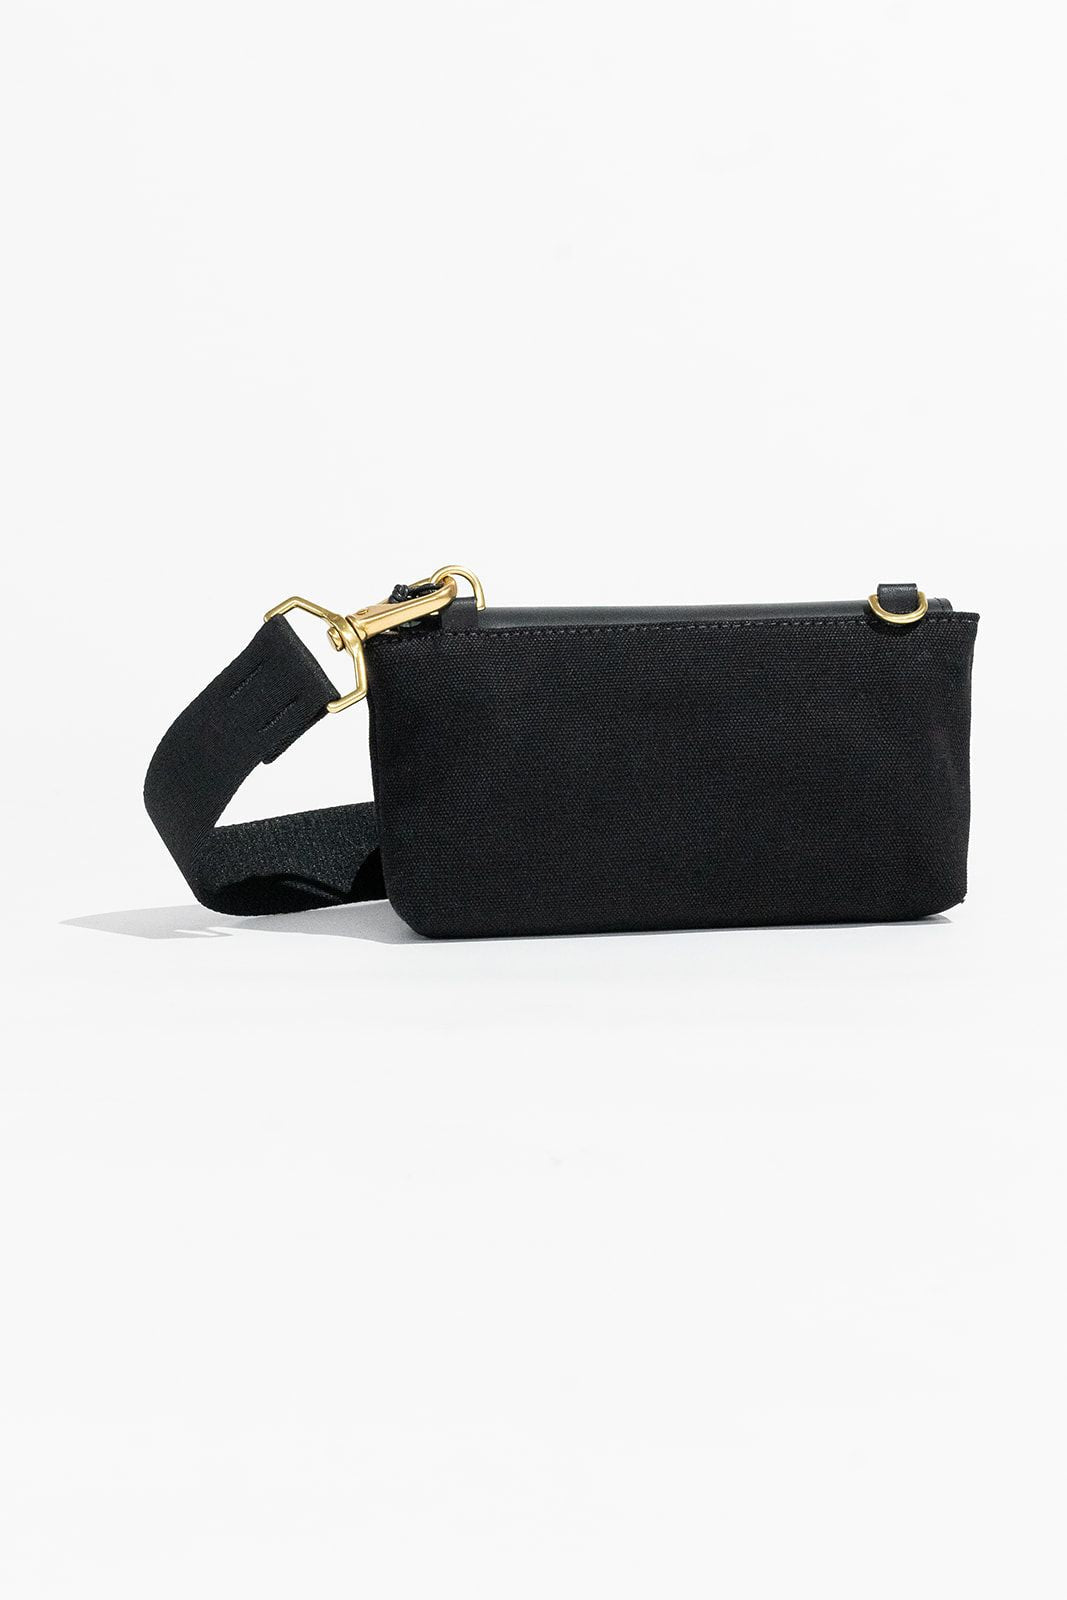 Whittle | Signature Black Canvas + Black Leather with Webbed Crossbody Strap